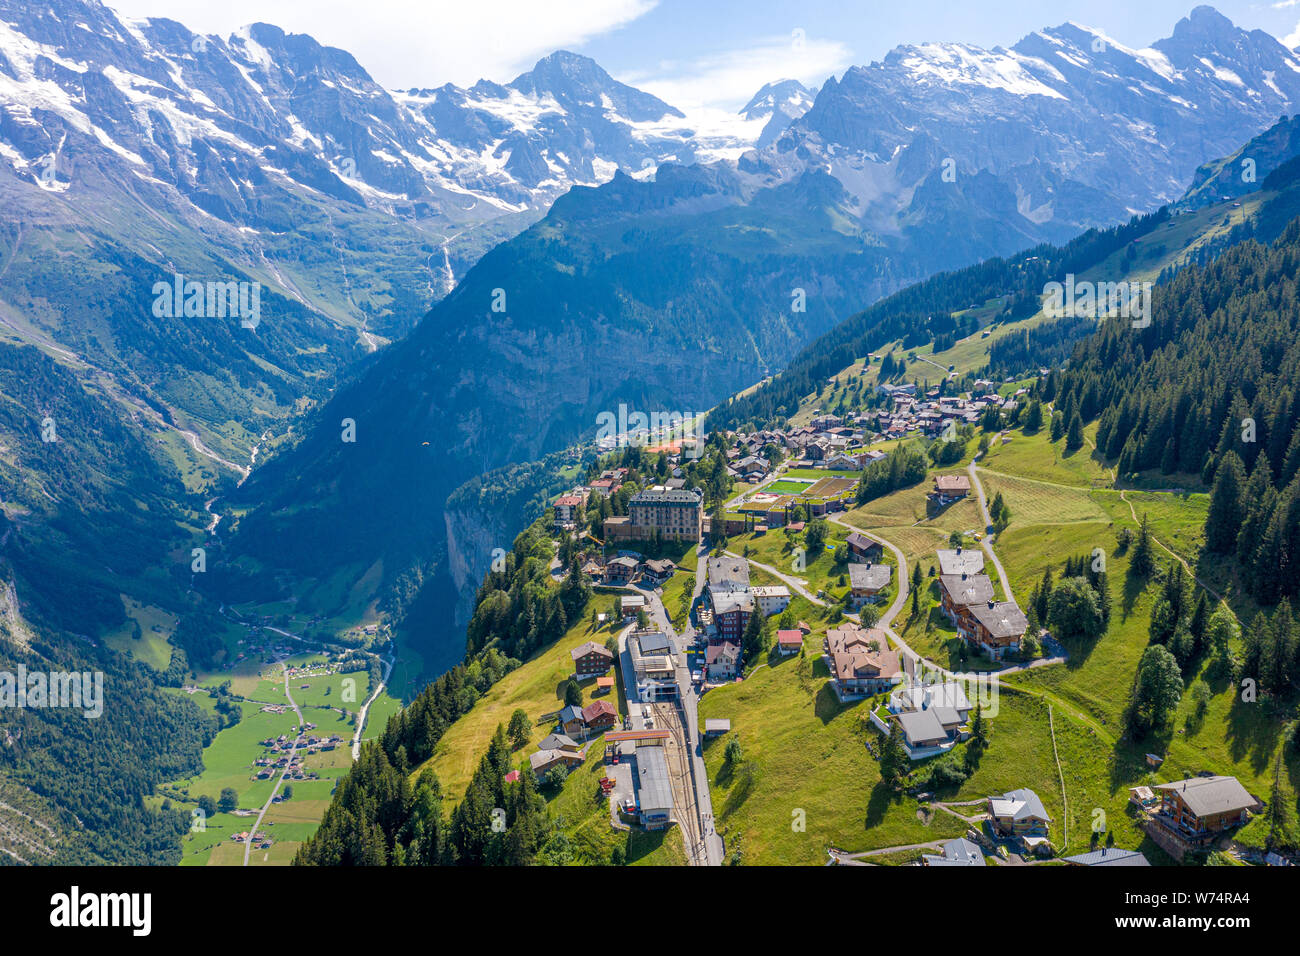 Amazing aerial view over the village of Murren in the Swiss Alps - aerial photography Stock Photo